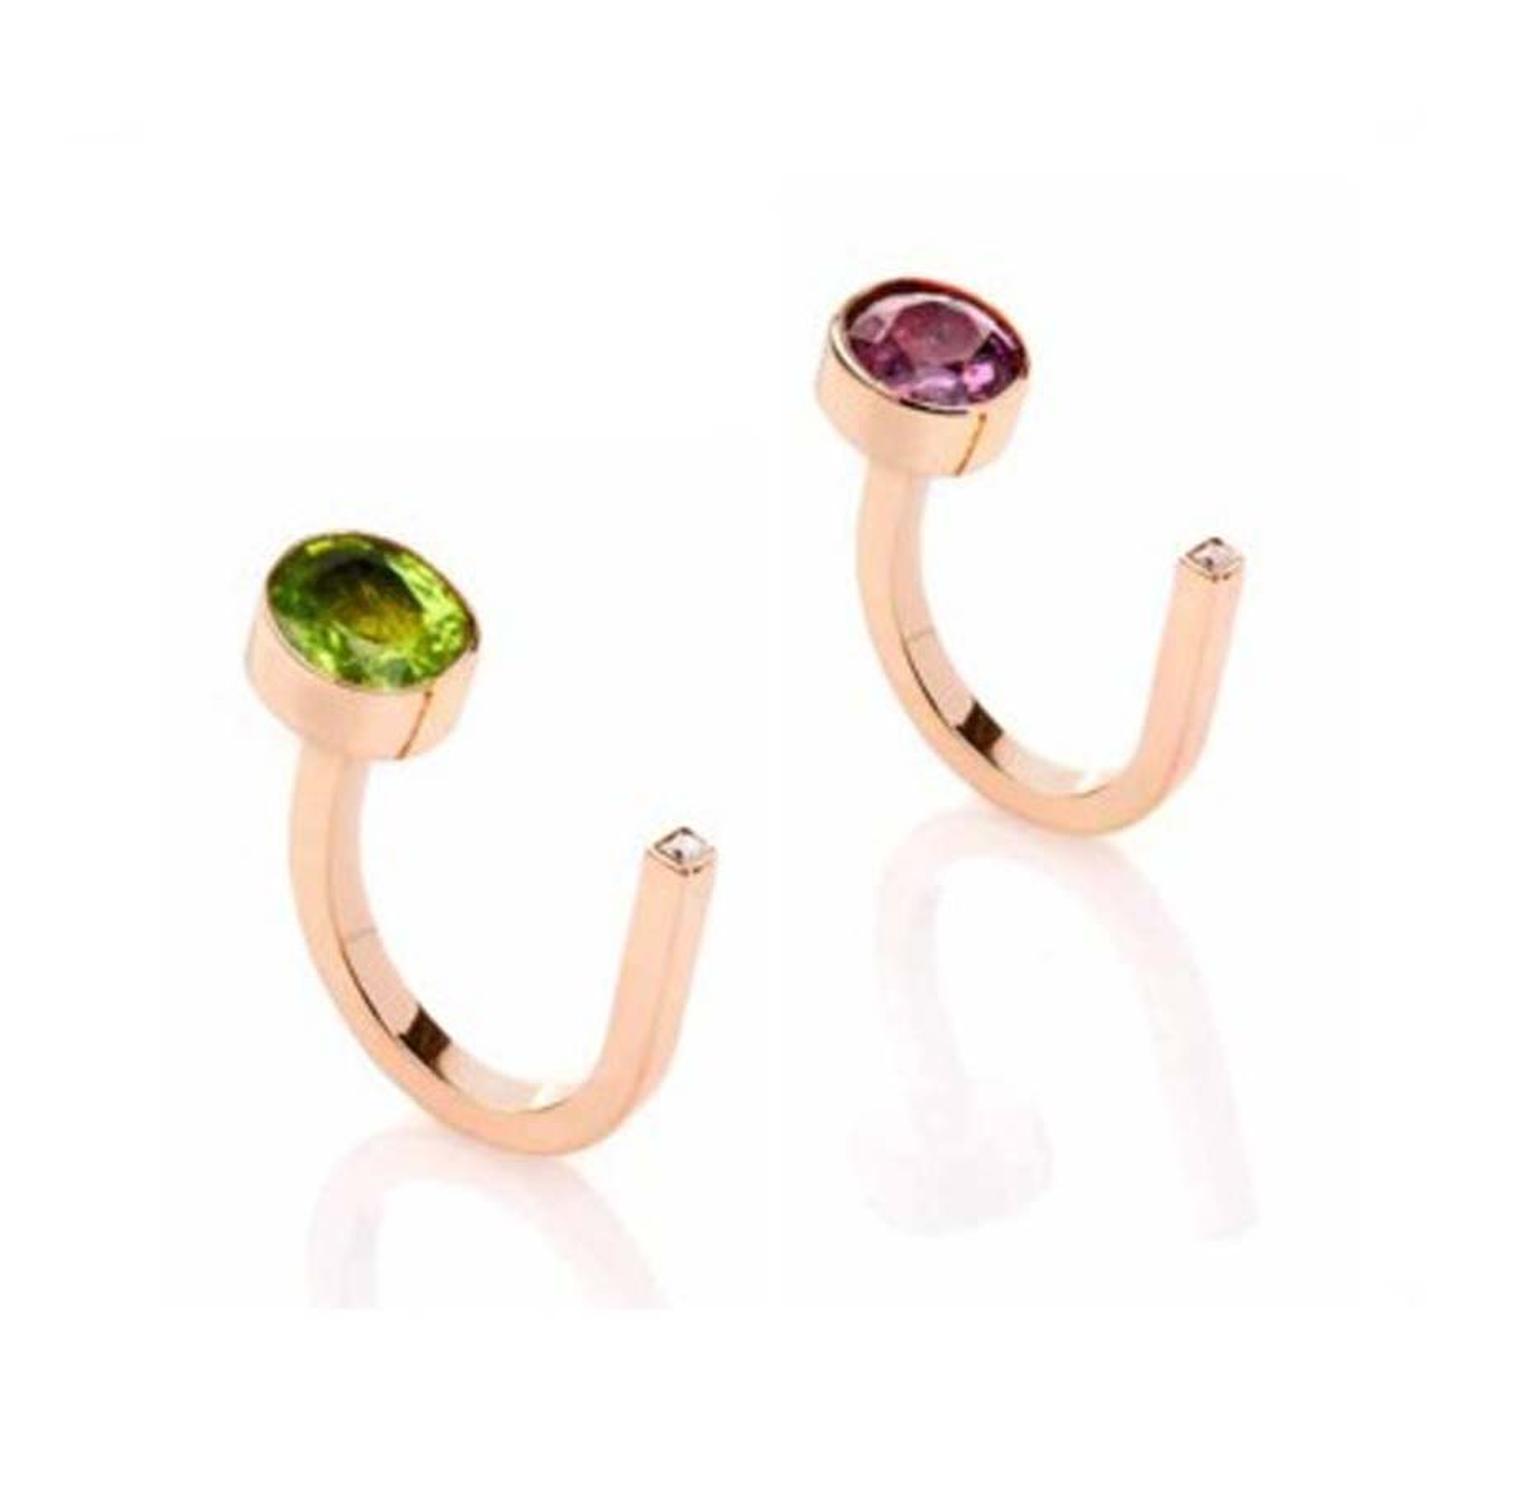 MyriamSOS Side Stone ring in rose gold with a peridot or princess-cut sapphire.